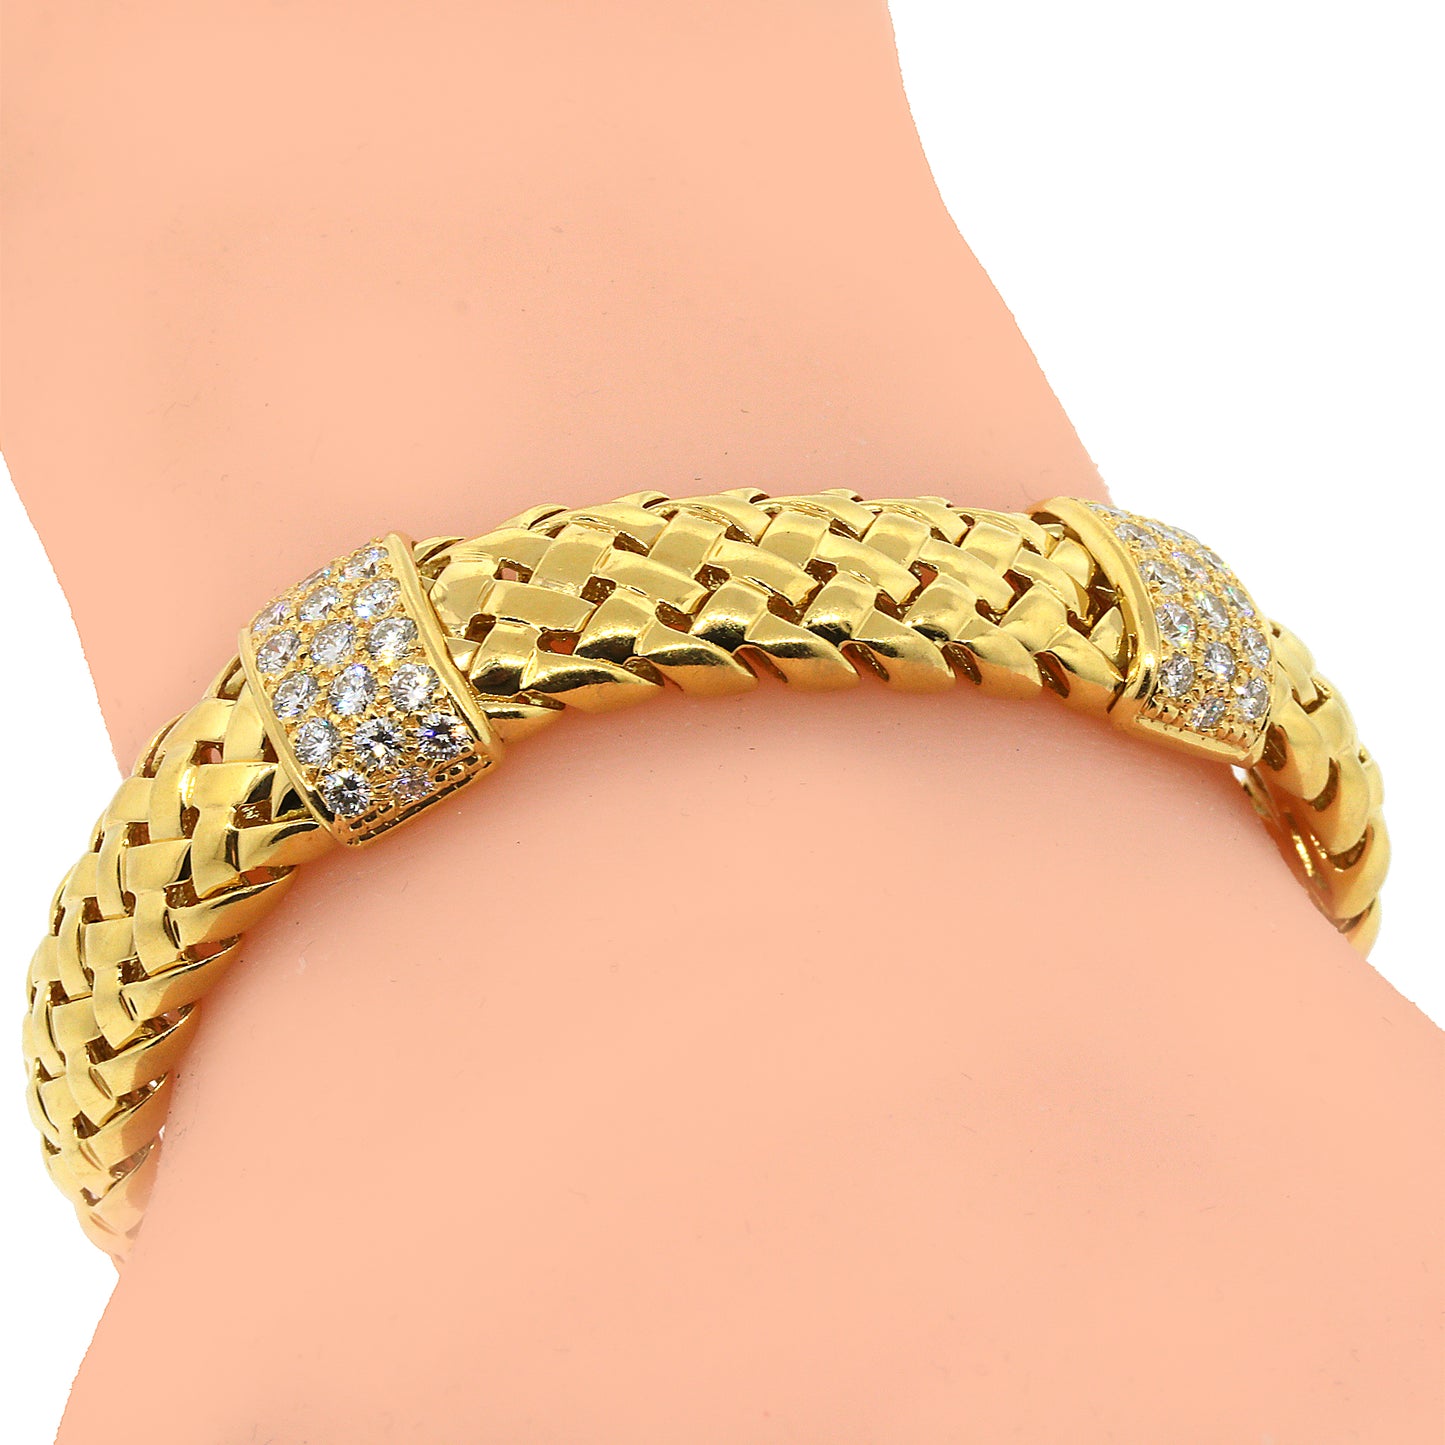 Tiffany and Co. Woven Link Vannerie Diamond Bracelet